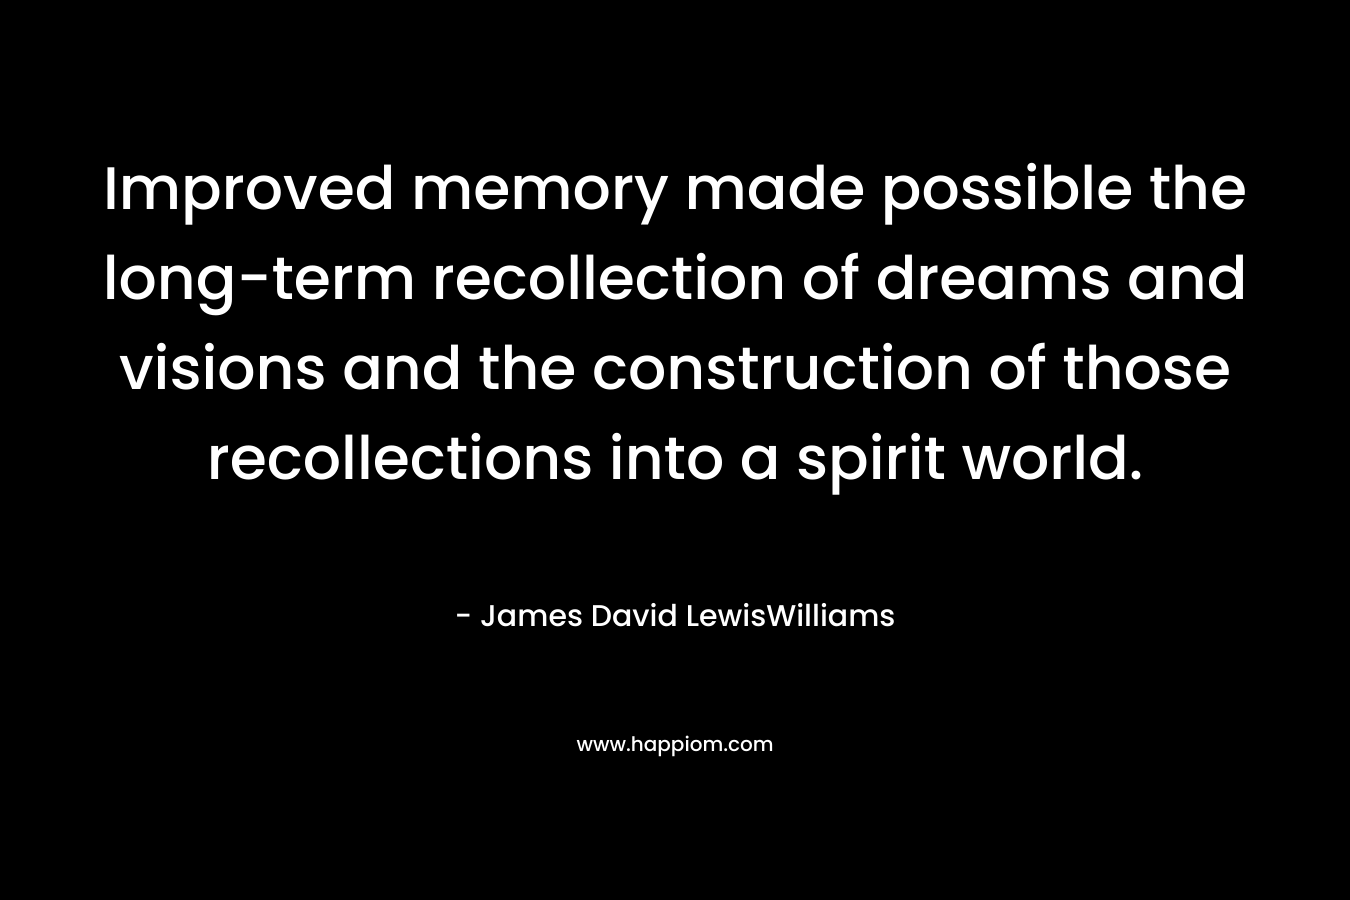 Improved memory made possible the long-term recollection of dreams and visions and the construction of those recollections into a spirit world. – James David LewisWilliams